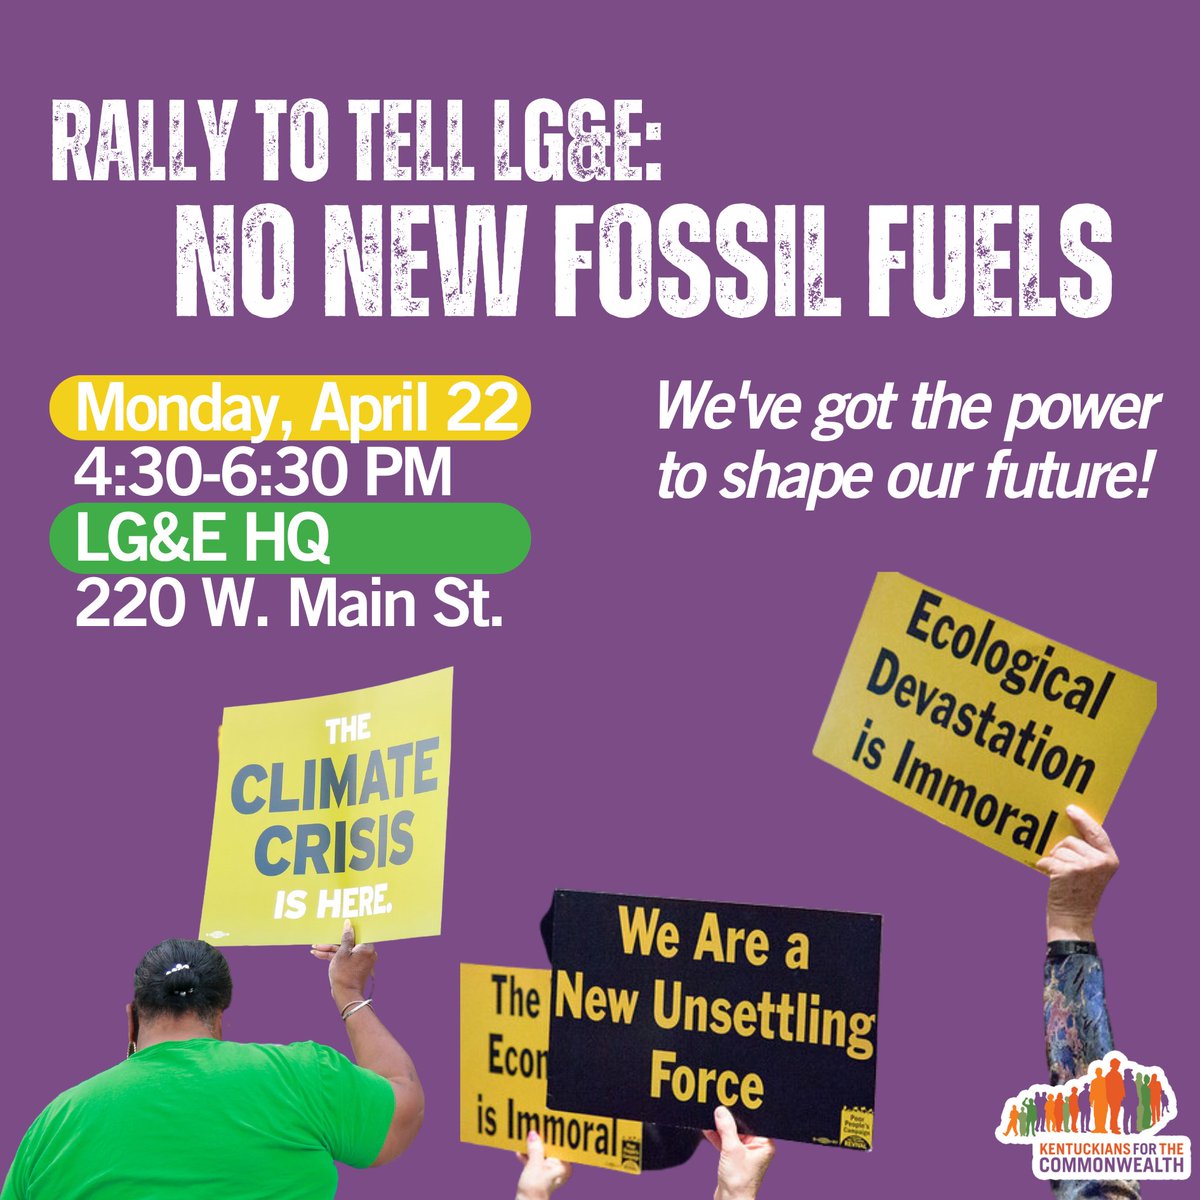 Let's come together to demand that LG&E/KU prioritize our people and planet. Join us for an Earth Day Rally on Monday, April 22 from 4:30-6:30 PM at LG&E HQ. Together, we can say NO to new fossil fuels and YES to a sustainable future. Sign up here: bit.ly/4avi7Wy 🌎